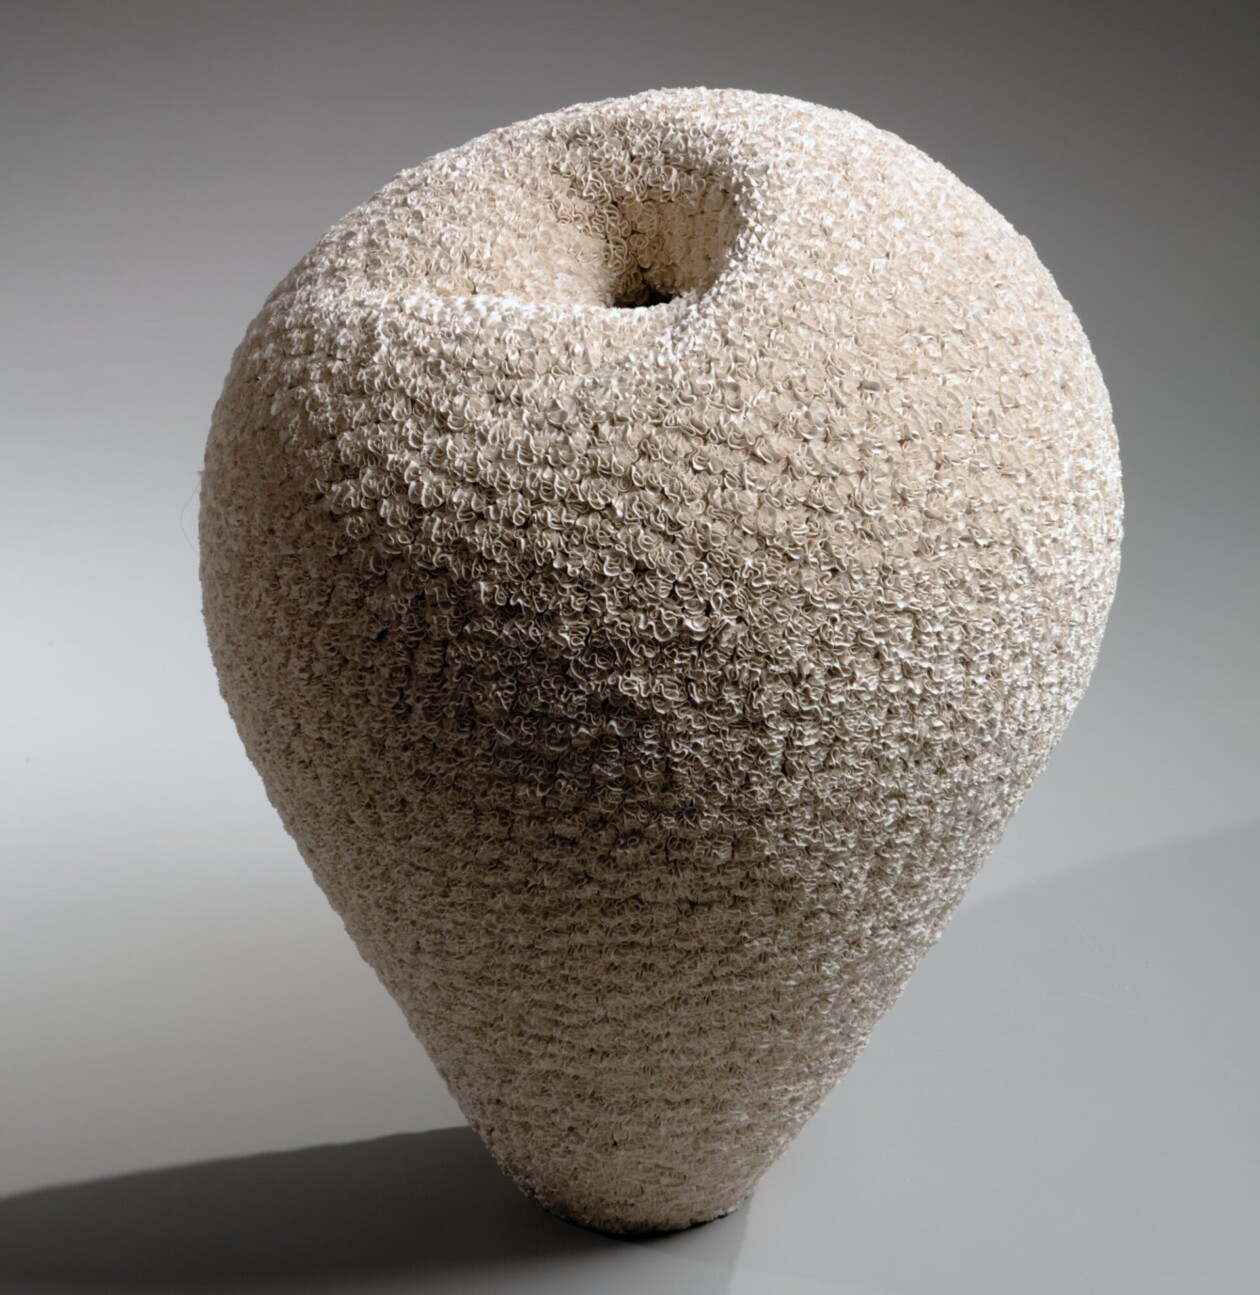 Intricately Coiled Porcelain Sculptures By Hattori Makiko (7)